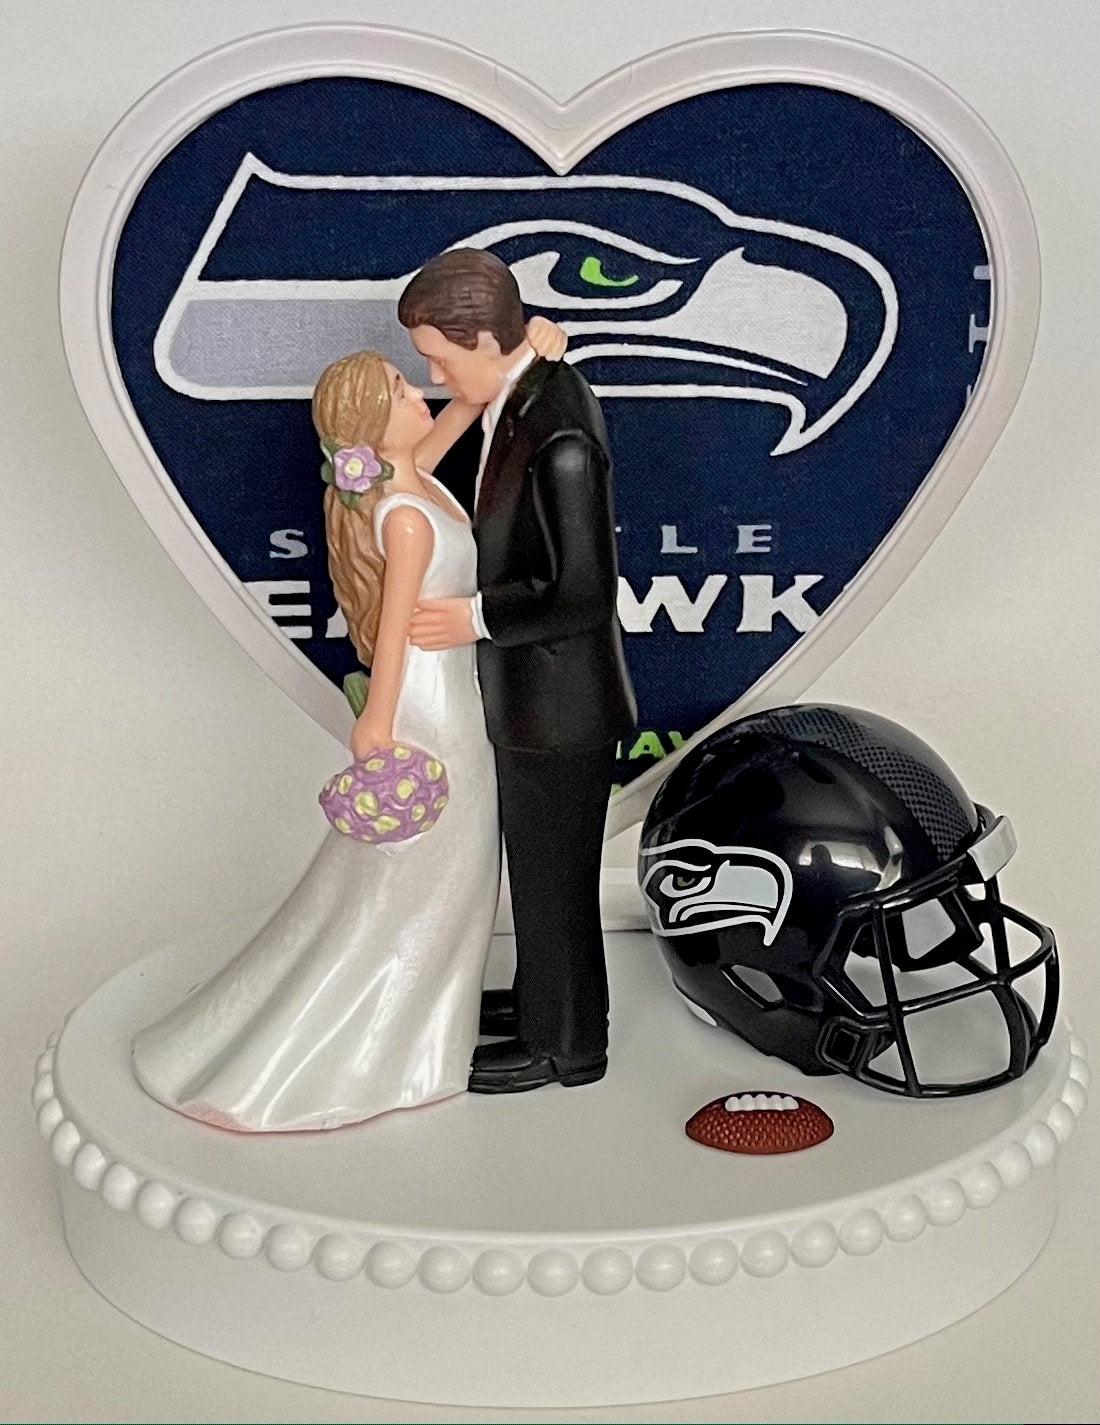 Wedding Cake Topper Seattle Seahawks Football Themed Beautiful Long-Haired Bride Fun Groom Sports Fans One-of-a-Kind Reception Bridal Gift